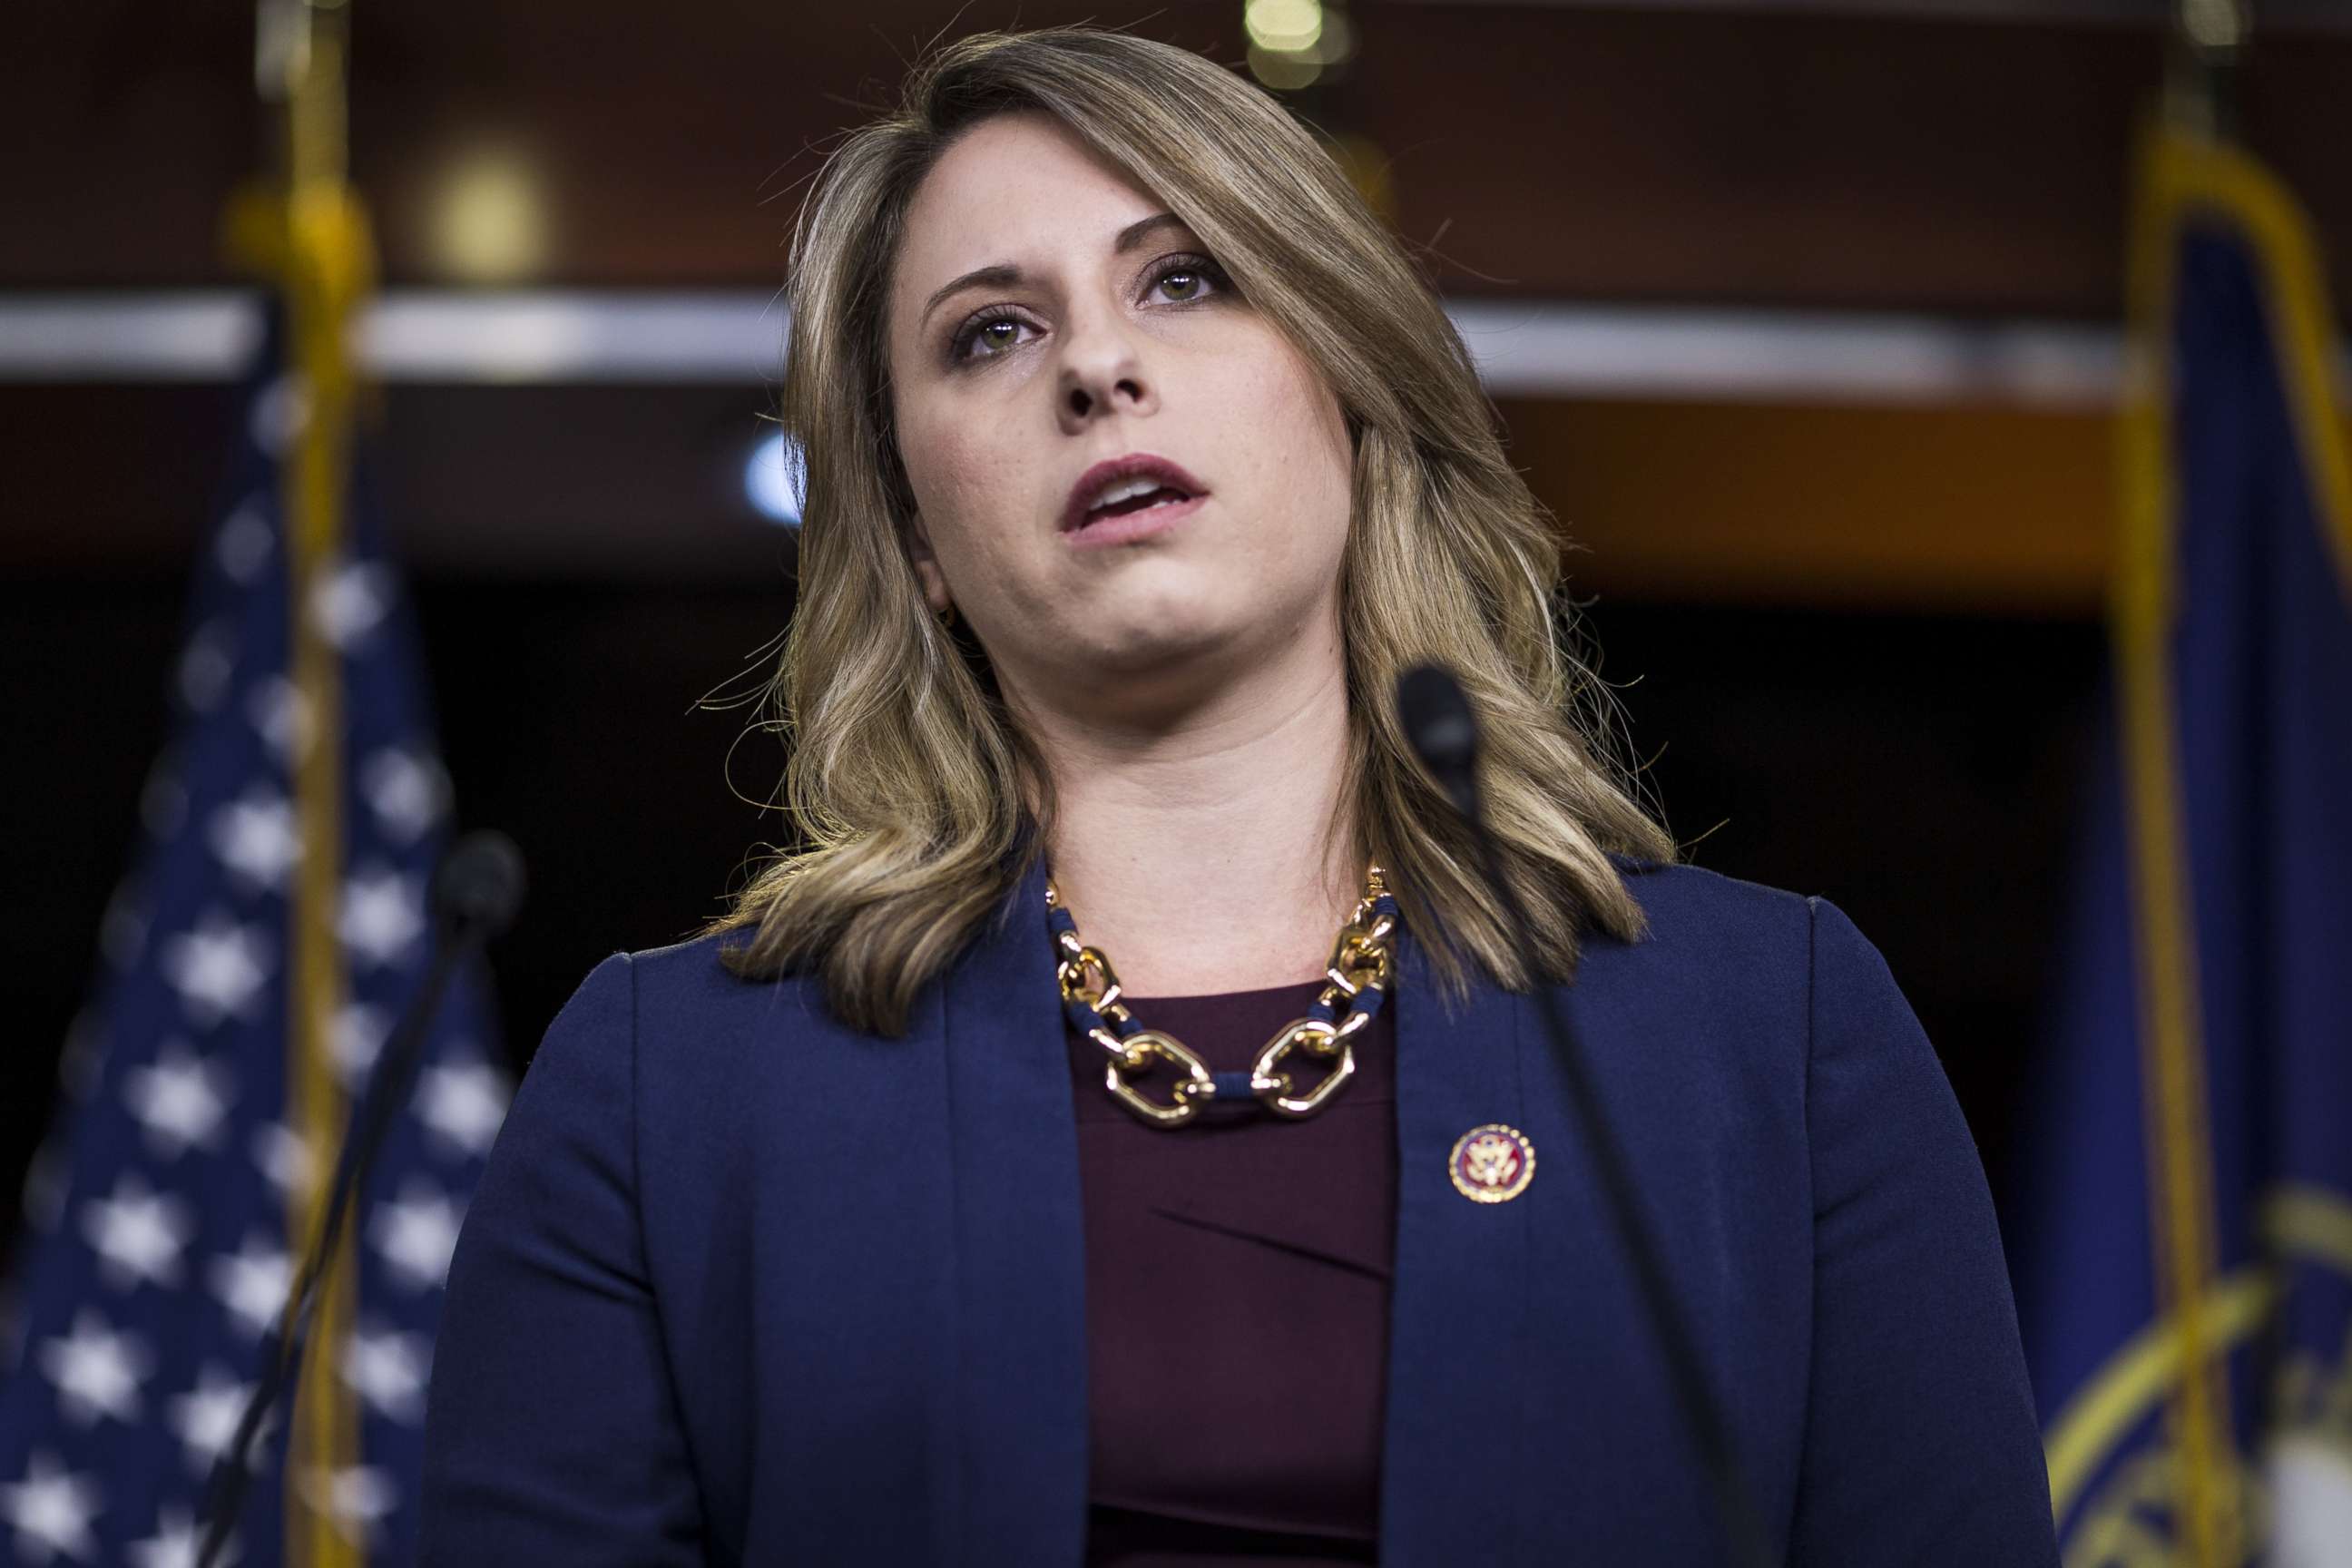 PHOTO: Rep. Katie Hill speaks during a news conference on April 9, 2019, in Washington.